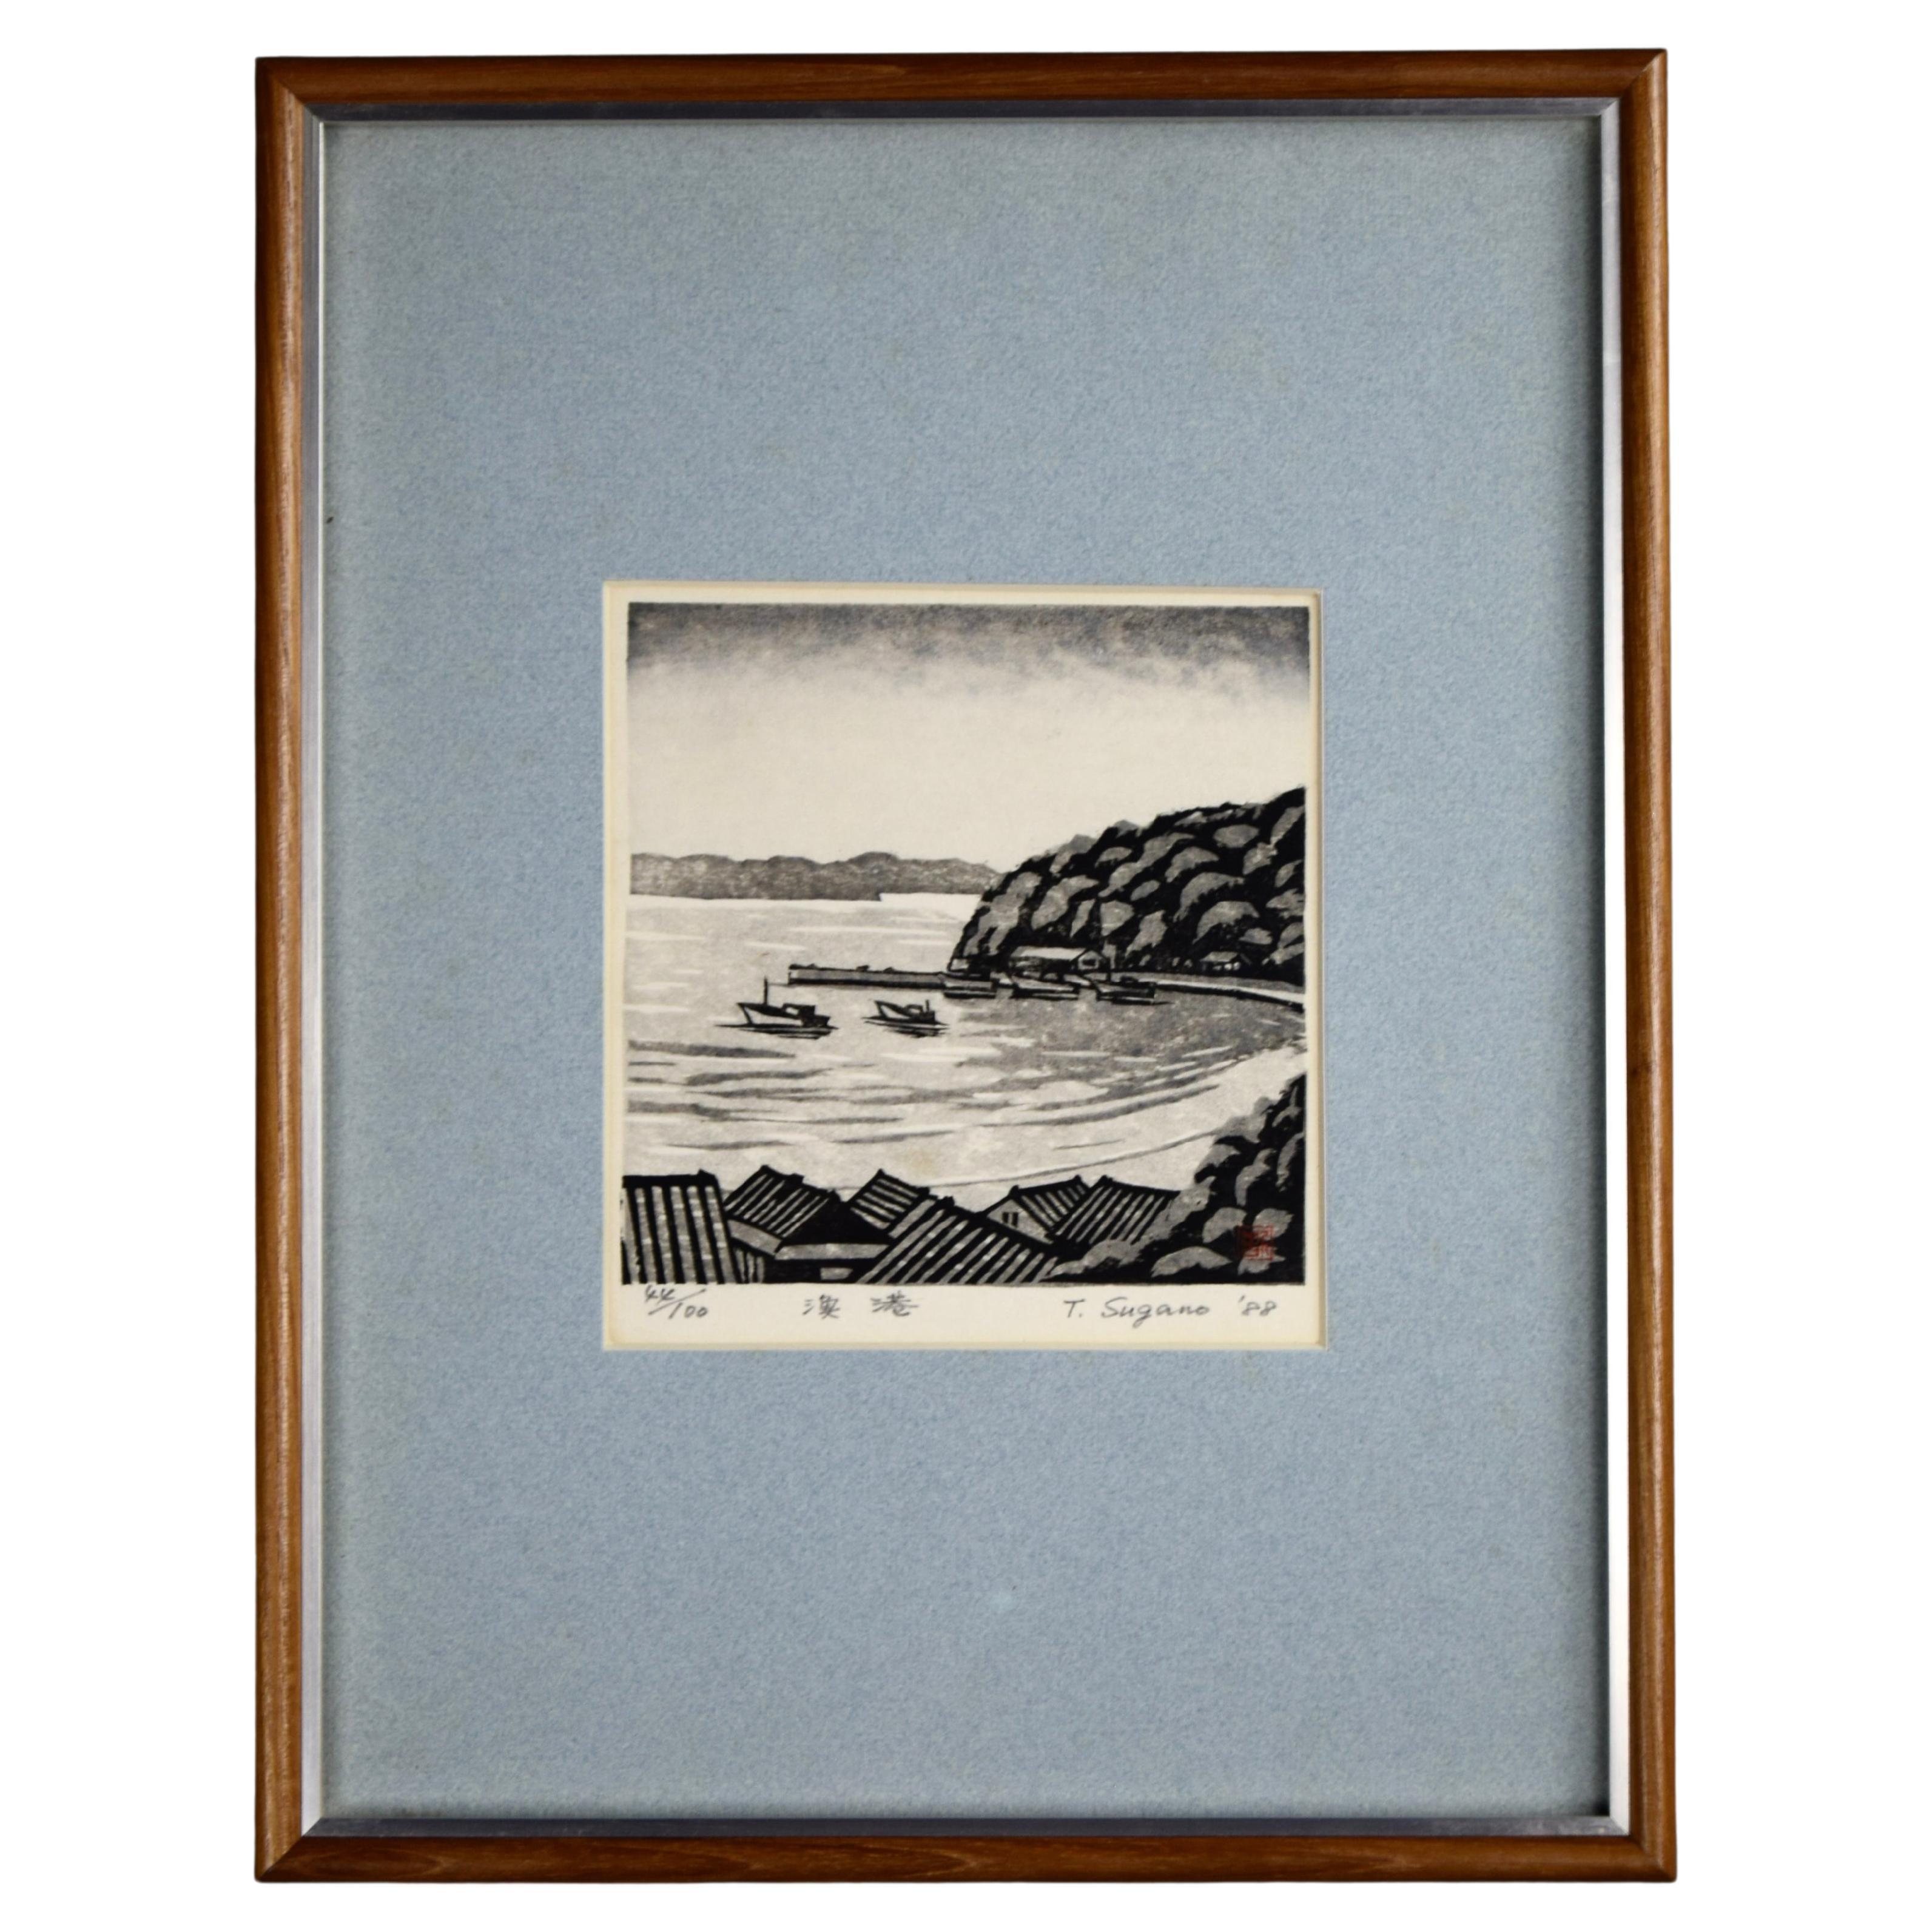 Traditional Japanese Woodblock Print featuring the Fishing Village Ine